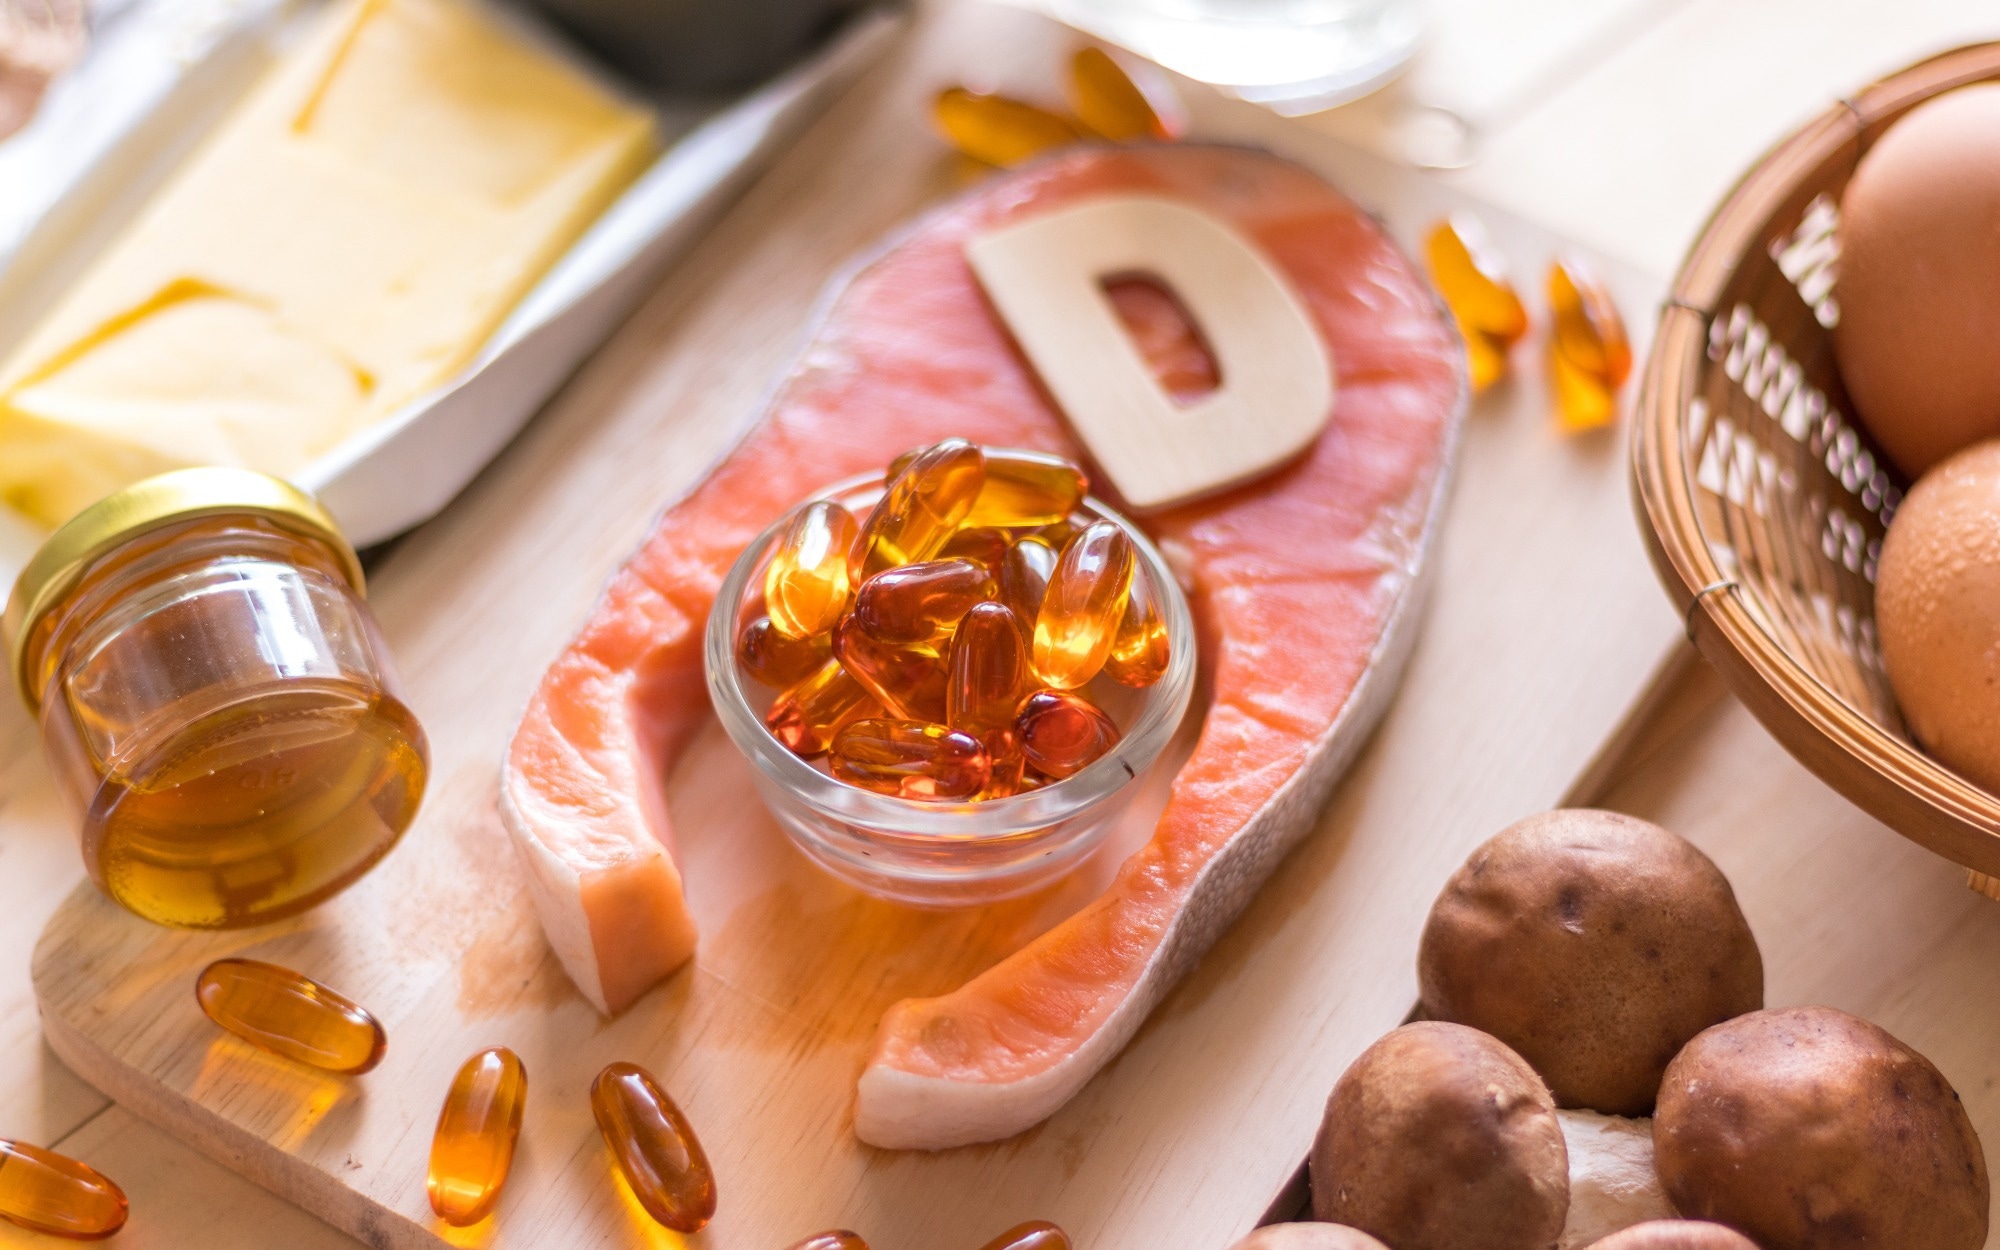 Vitamin D deficiency persists despite easy access, review suggests need for tailored supplements